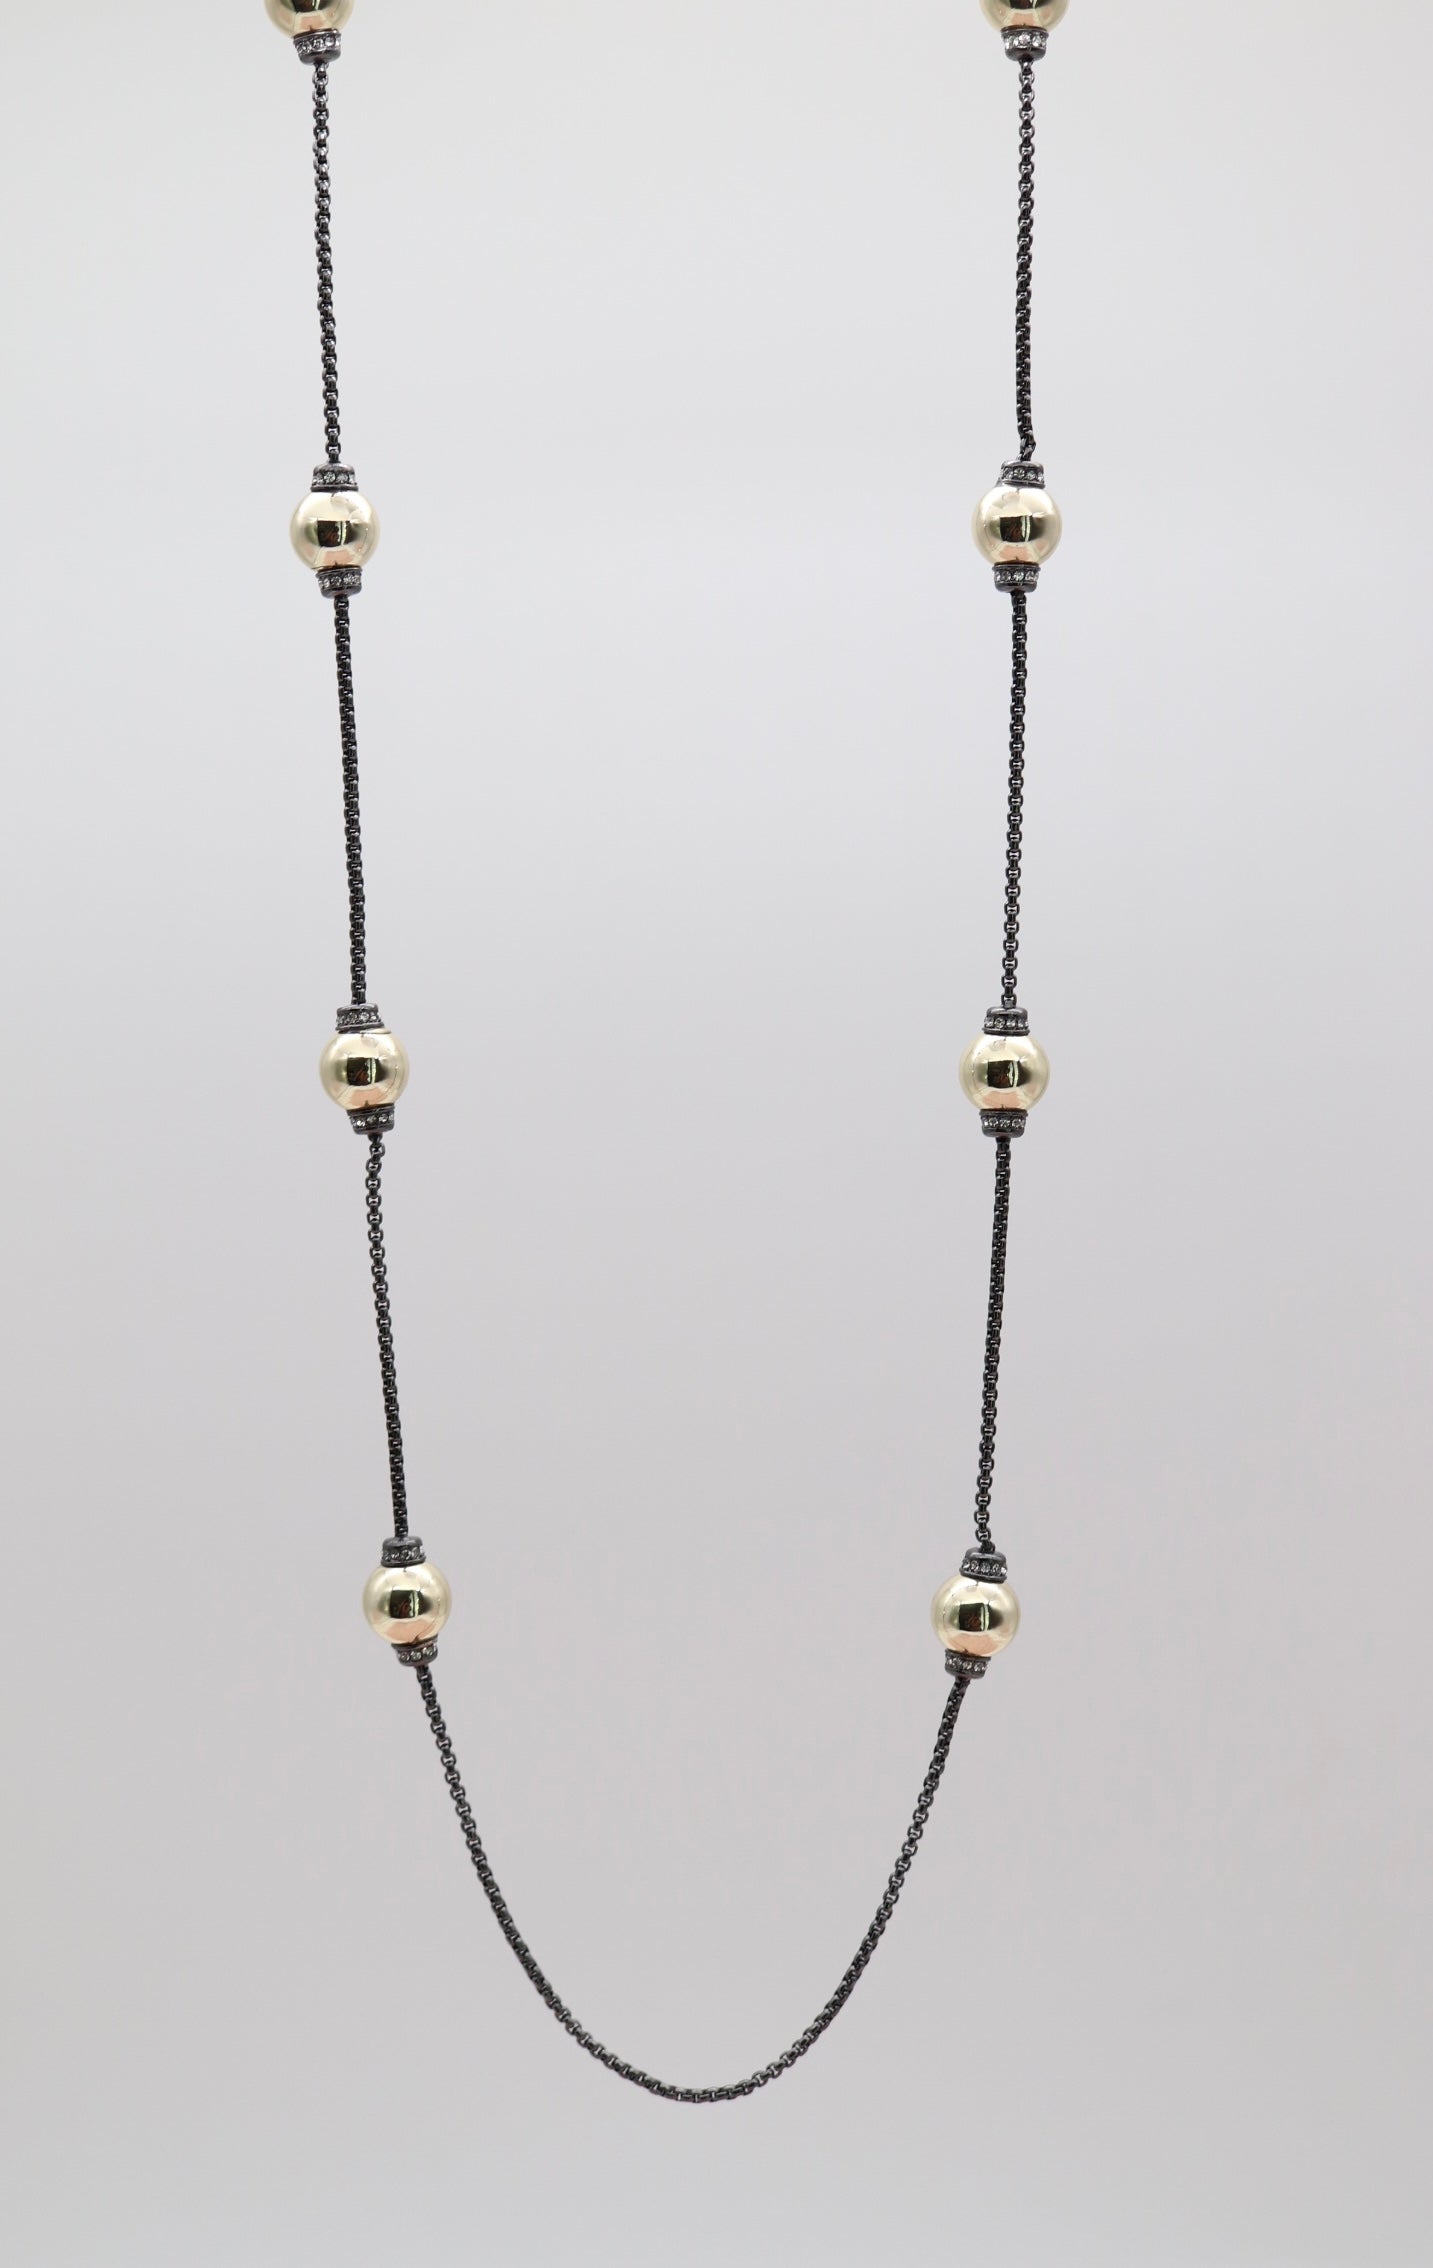 Long Black Necklace With Gold Ball Stations